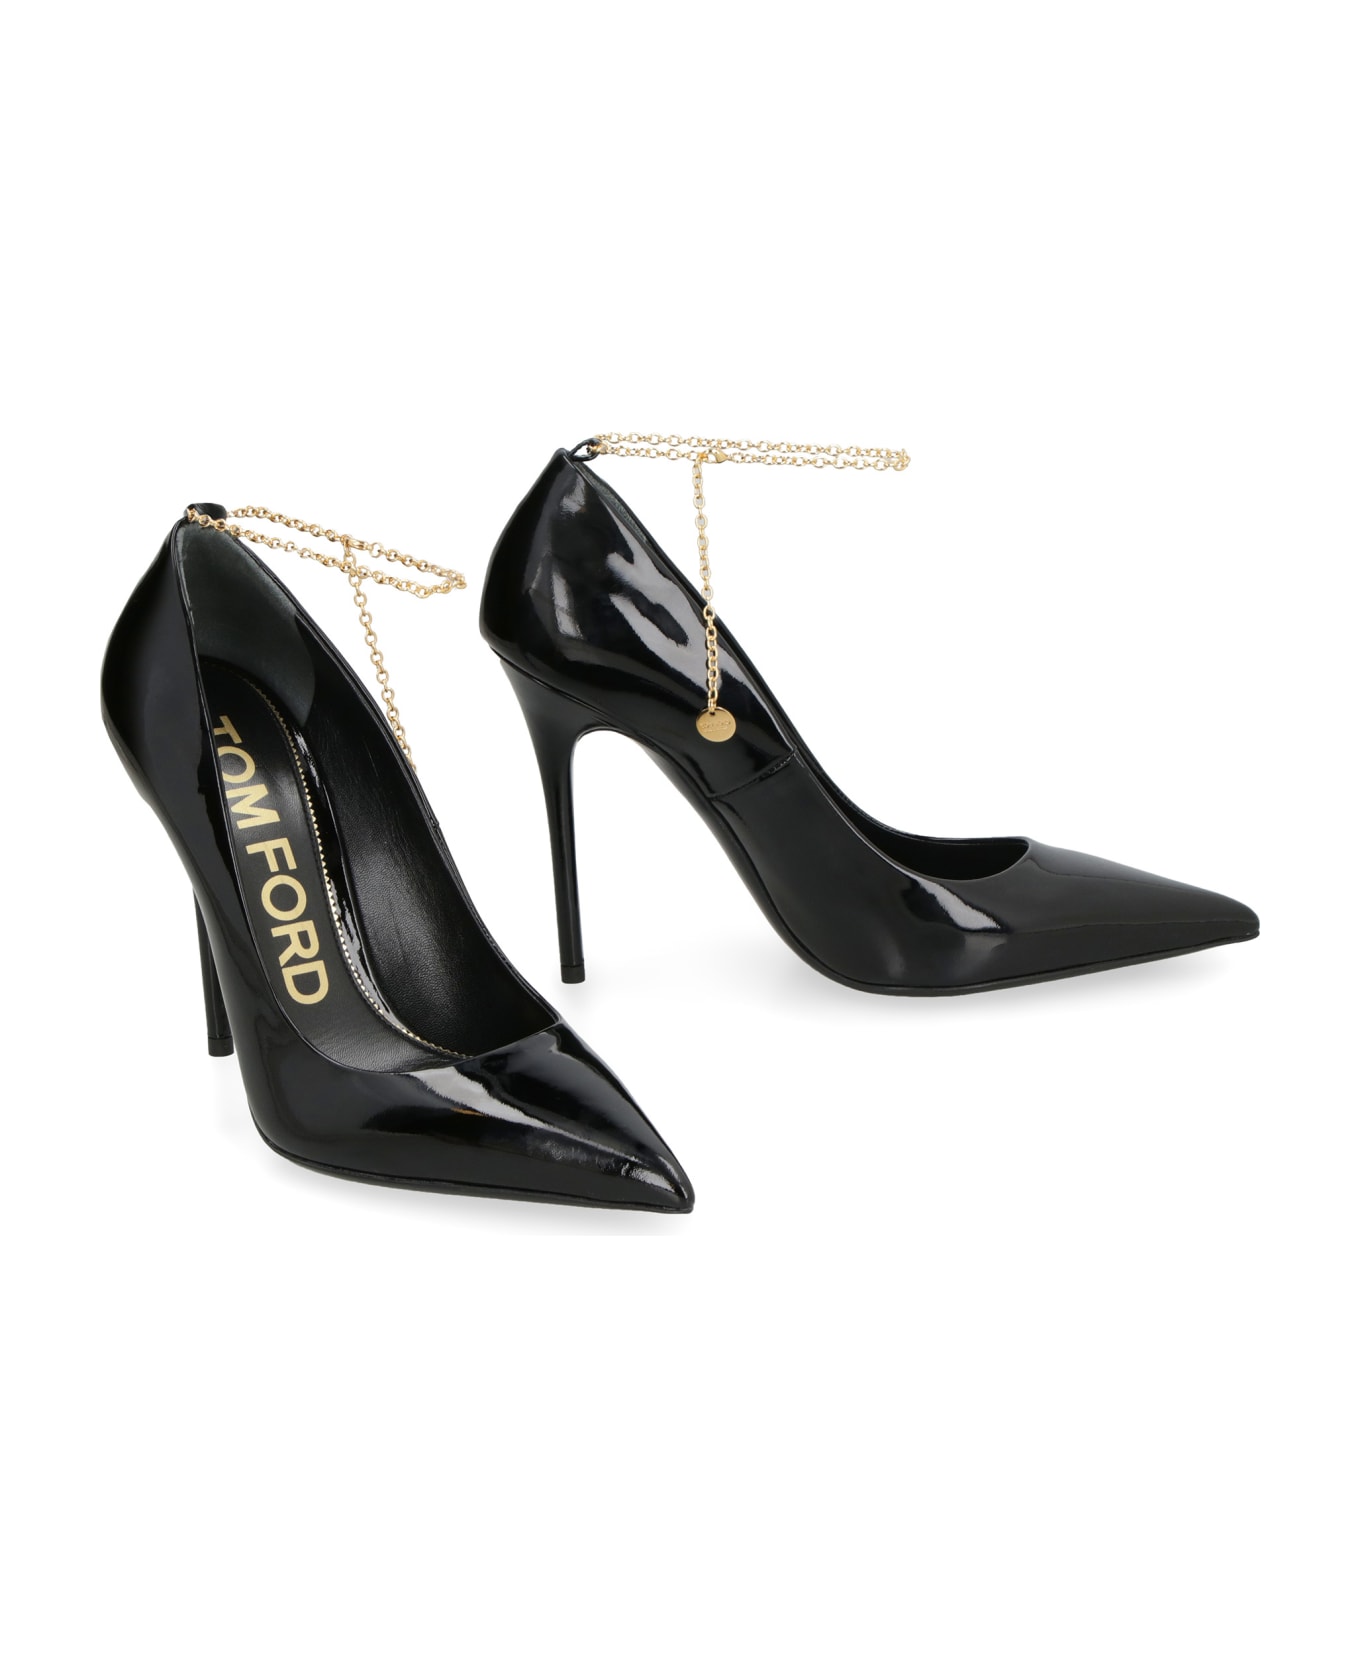 Tom Ford Patent Leather Pumps - black